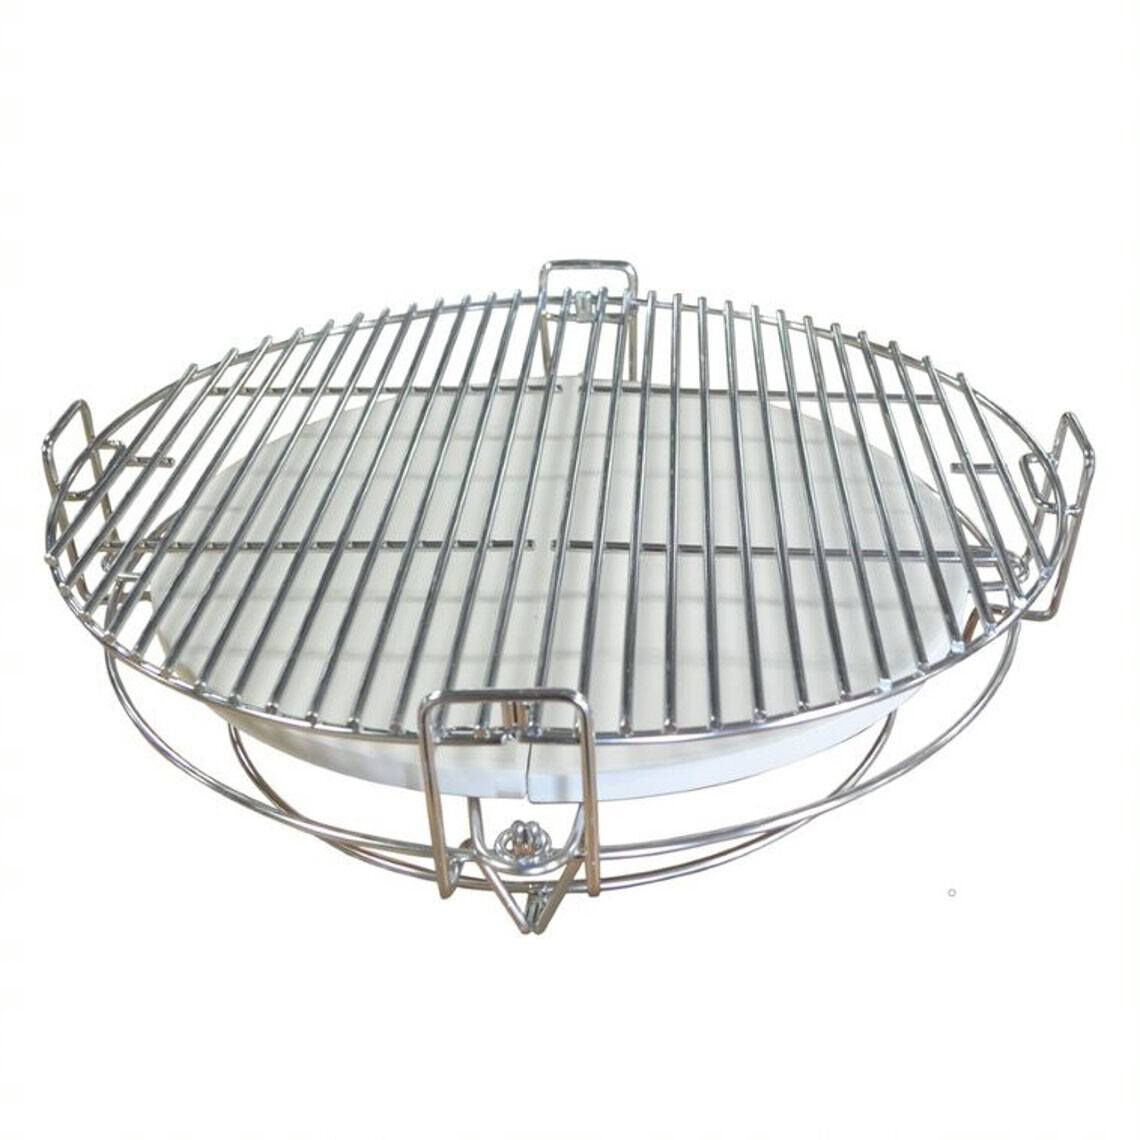 Multi-Level Cooking System Fits 15" Grill - Fits Grill Size: 18" | 18"